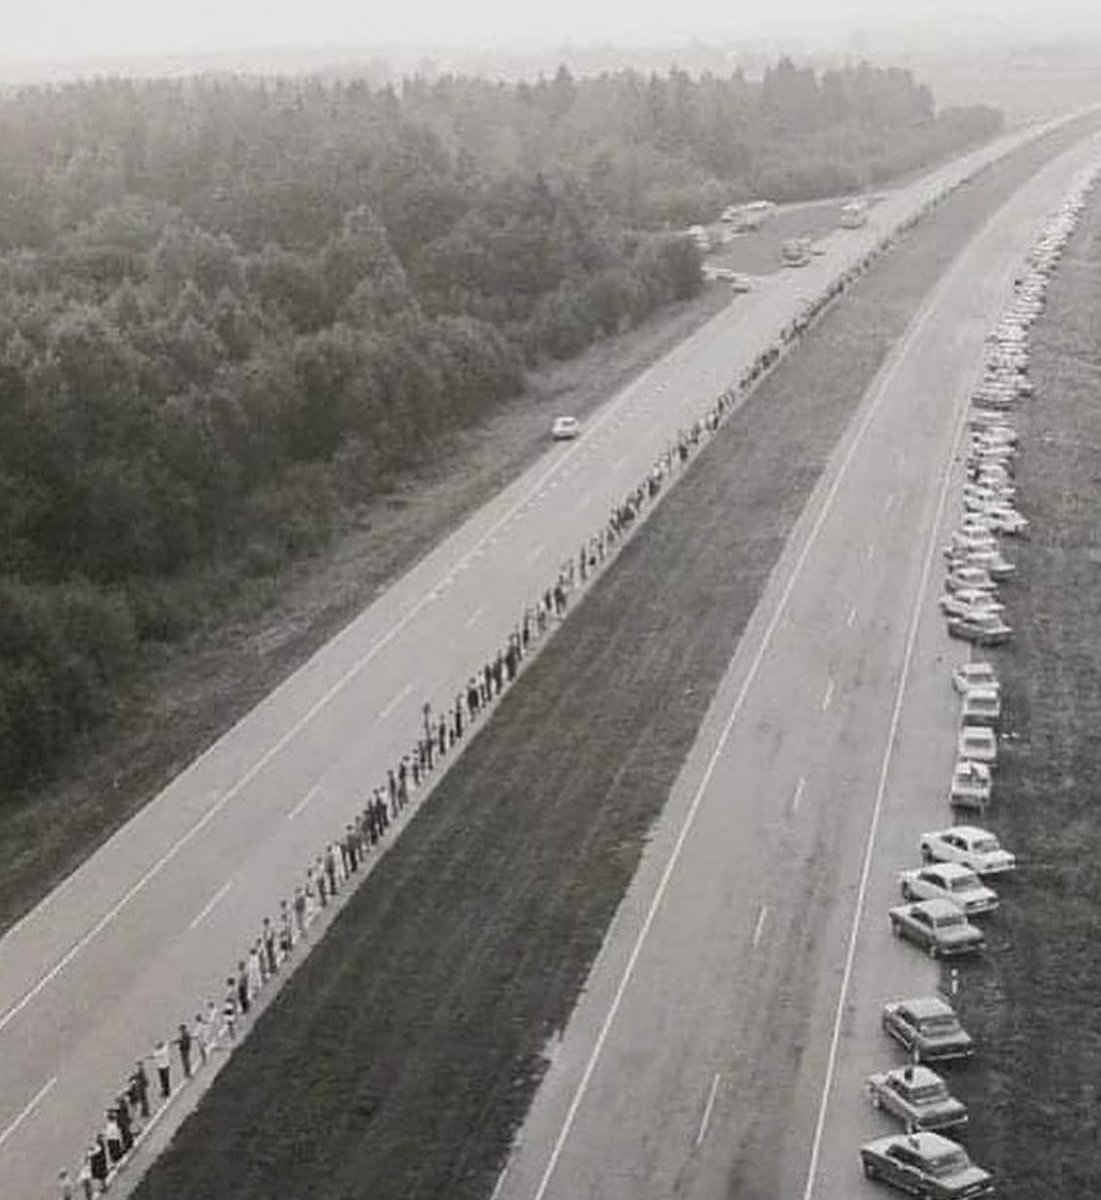 This is the Baltic Way. On 23 August 1989, two million people joined their hands to form a human chain spanning 675.5 km across the three Baltic States of Lithuania, Estonia and Latvia. The protest was against Soviet oppression, and to support the independence movements of the